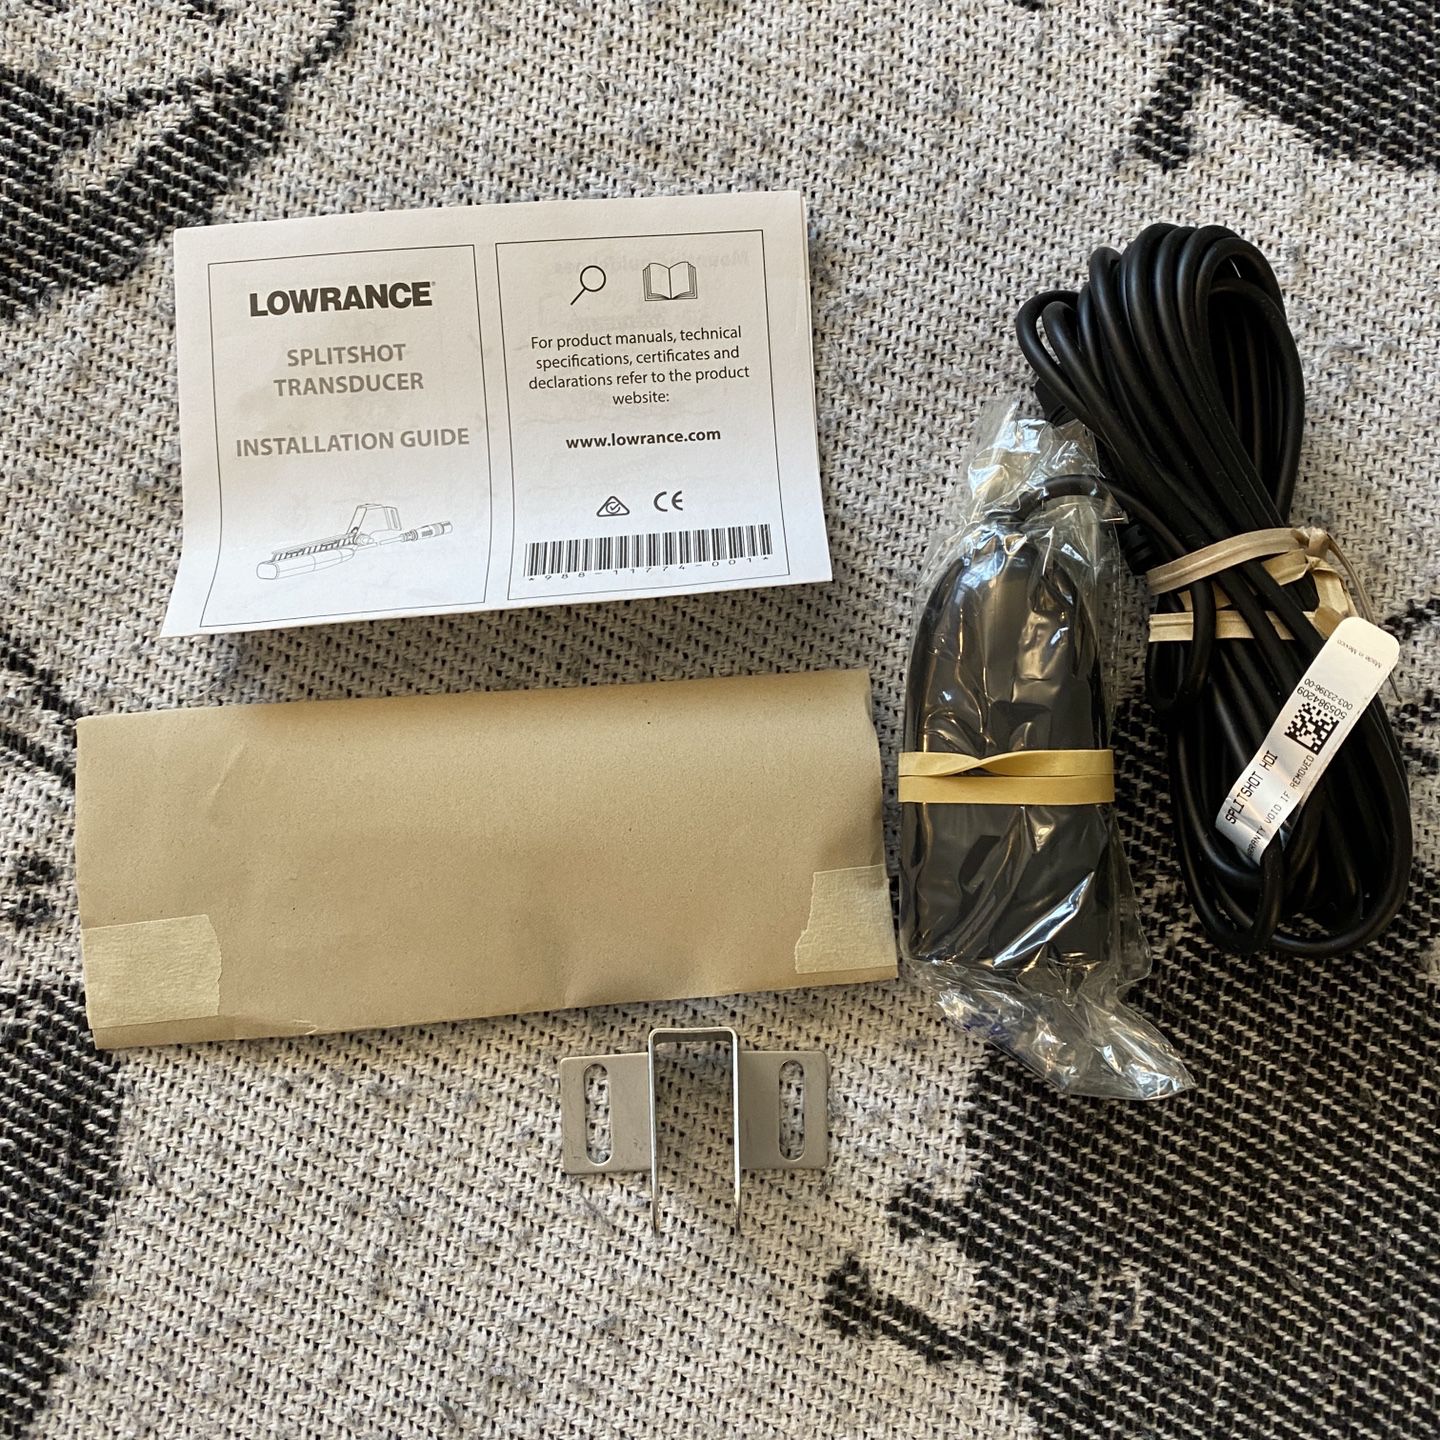 Lowrance SplitShot Skimmer Transducer, fits Lowrance HOOK2 Fish Finders for  Sale in Des Plaines, IL - OfferUp